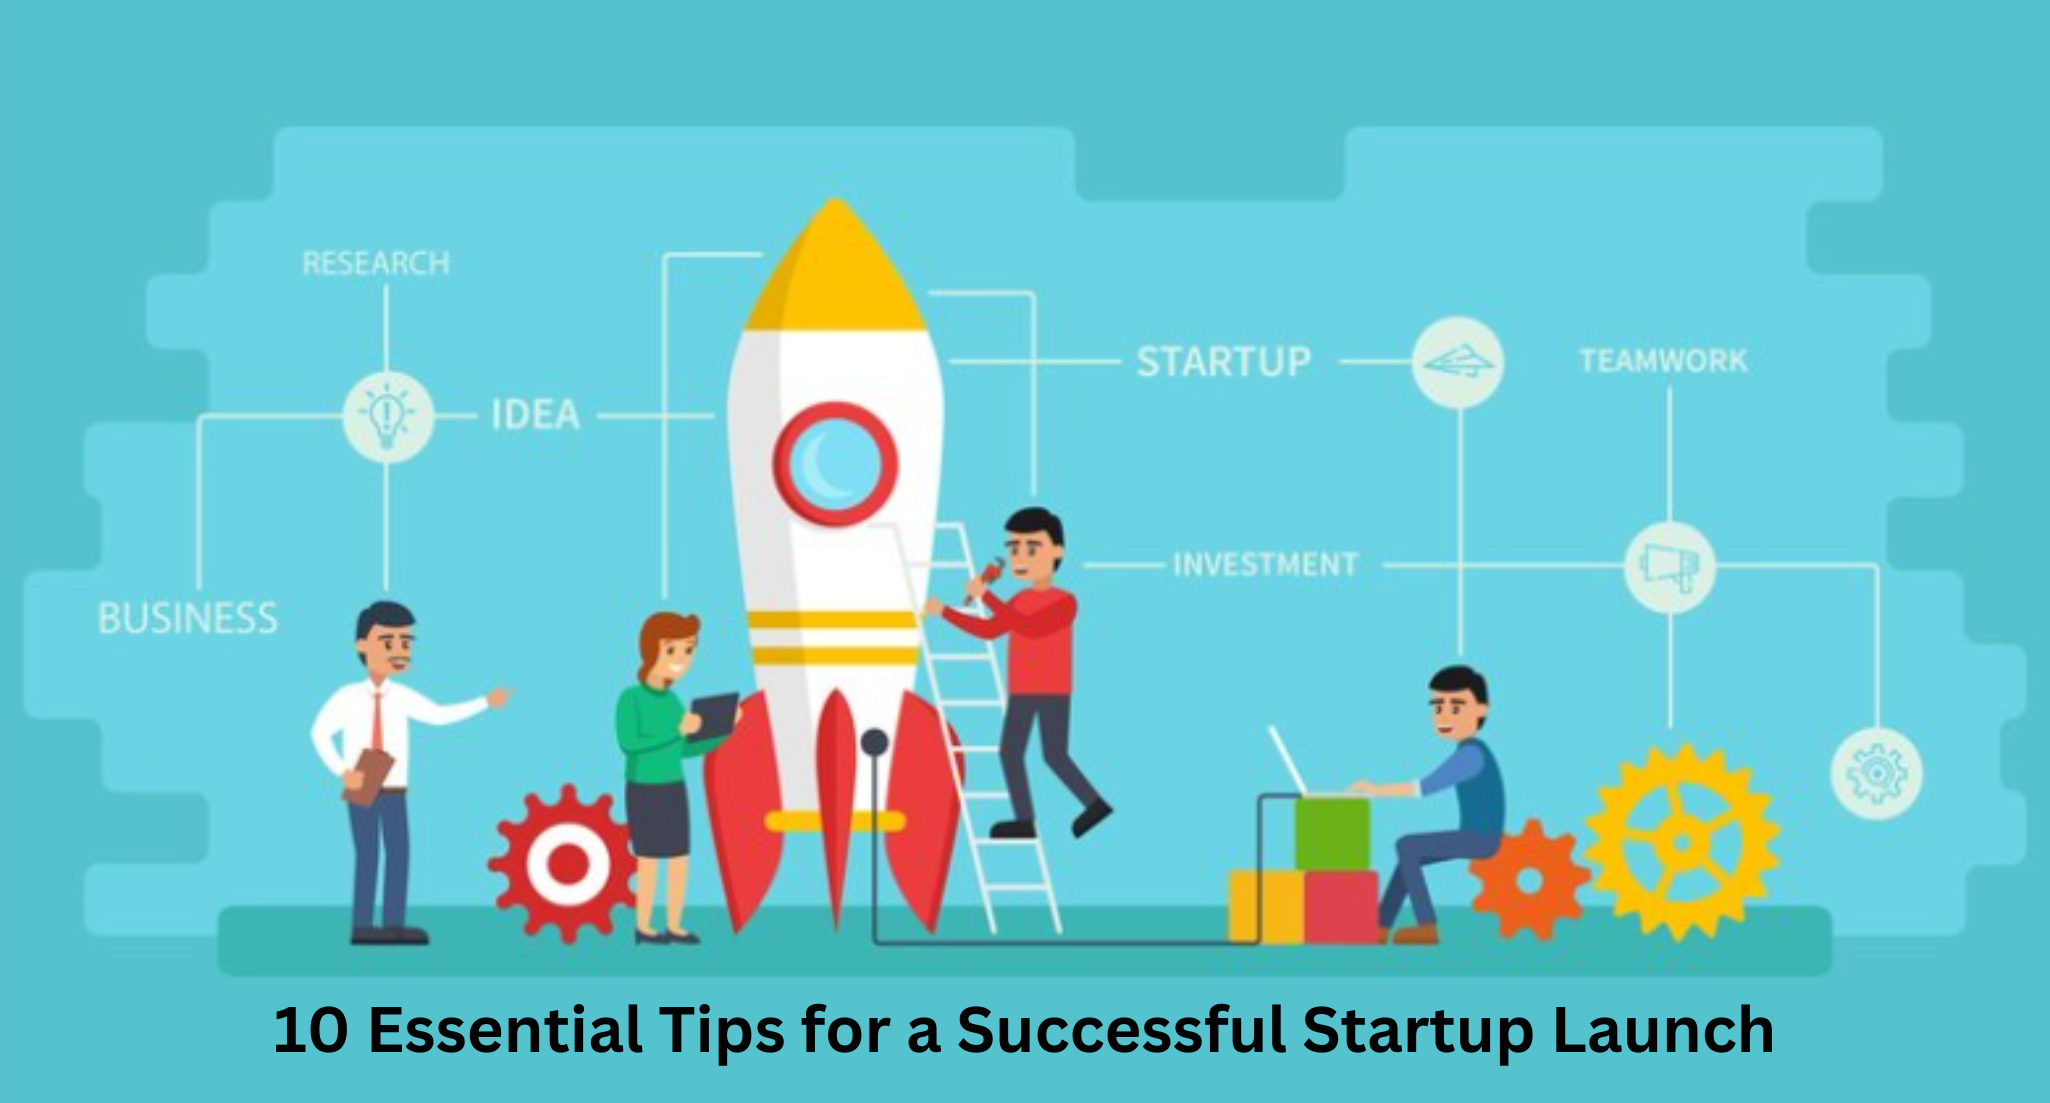 entrepreneurs brainstorming ideas for a successful startup launch - 10 Essential Tips